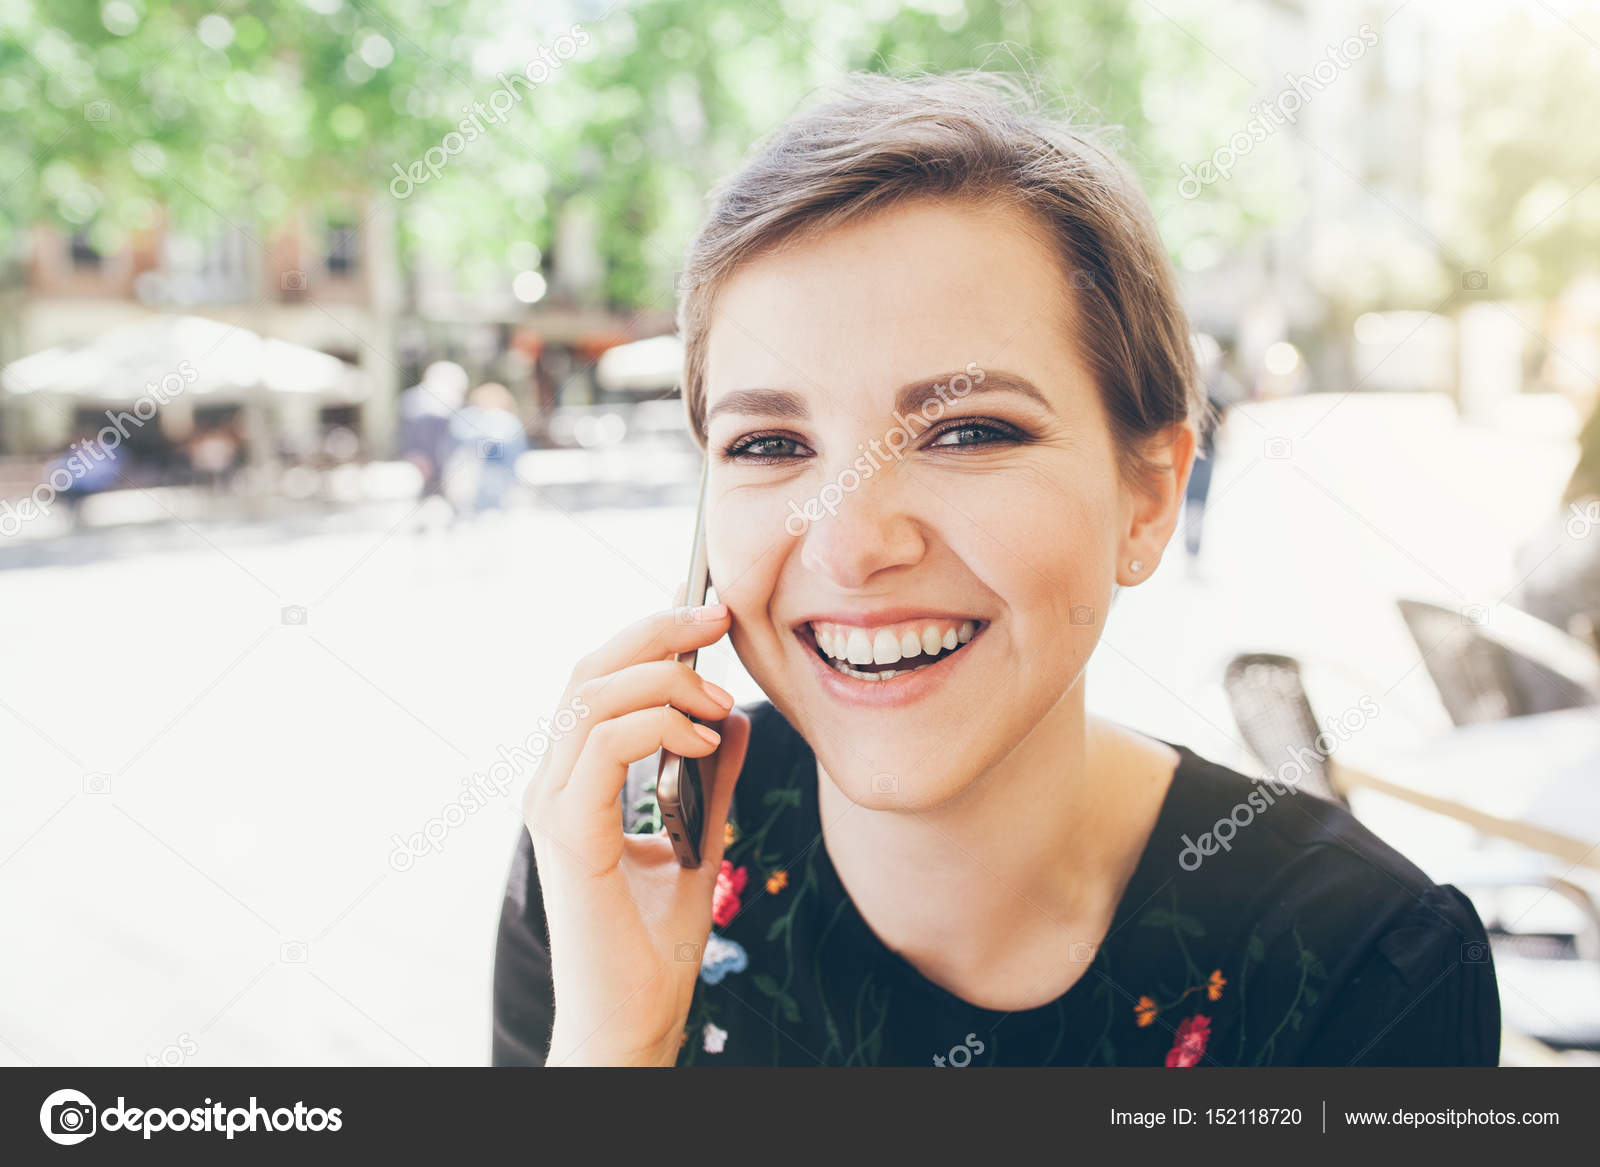 Girl With Short Pixie Haircut Is Having A Phone Conversation